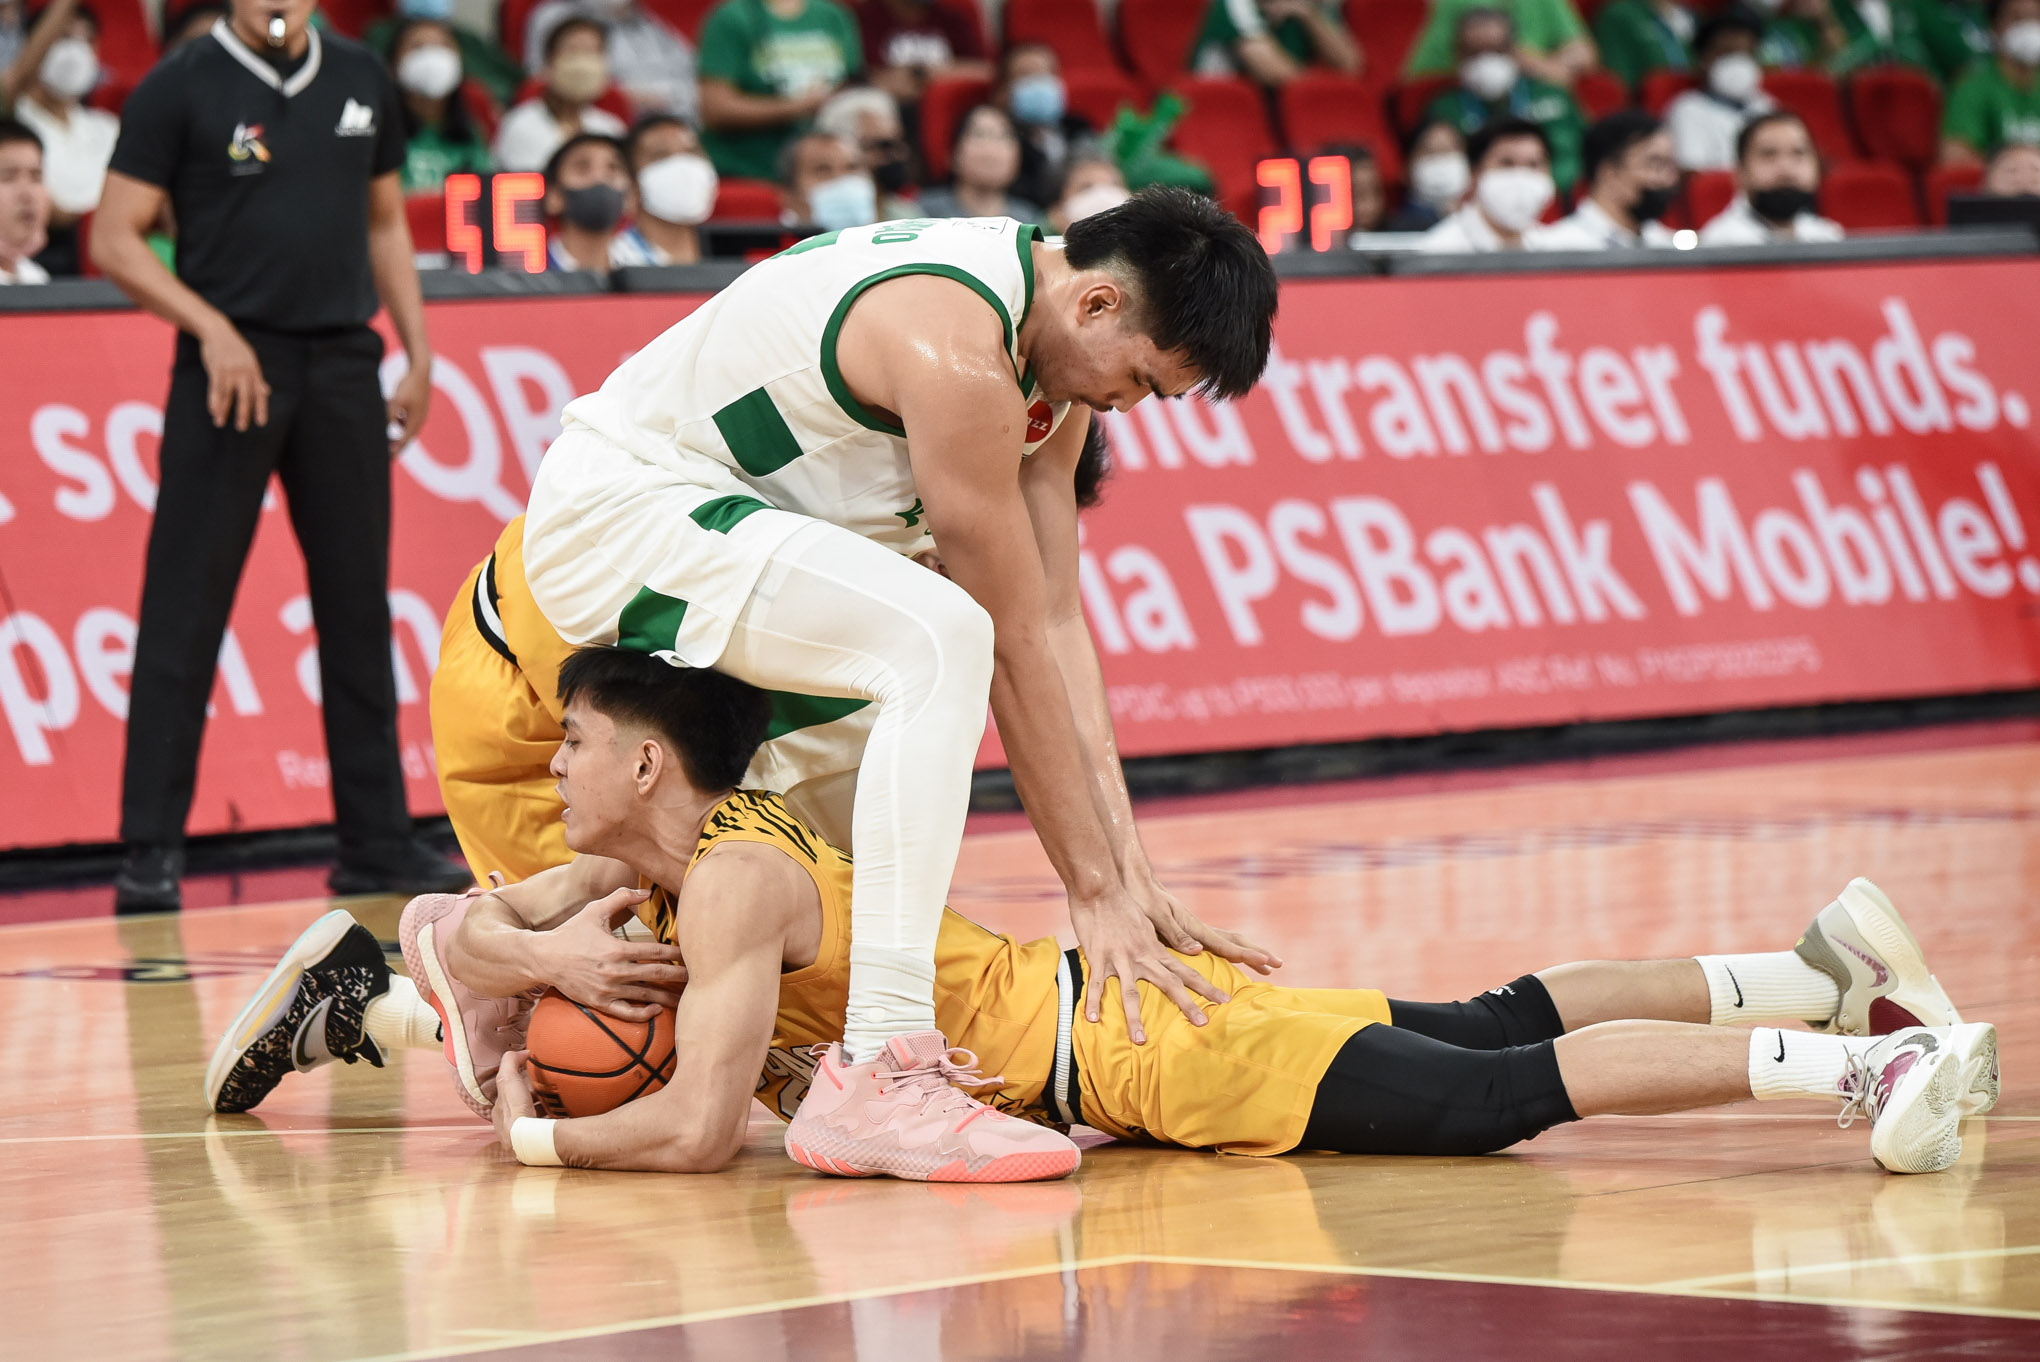 UAAP85-KEVIN-QUIAMBAO-IVAN-LAZARTE Learning from hyped game vs Tamayo, Quiambao keeps emotion in check for Ateneo clash Basketball DLSU News UAAP  - philippine sports news